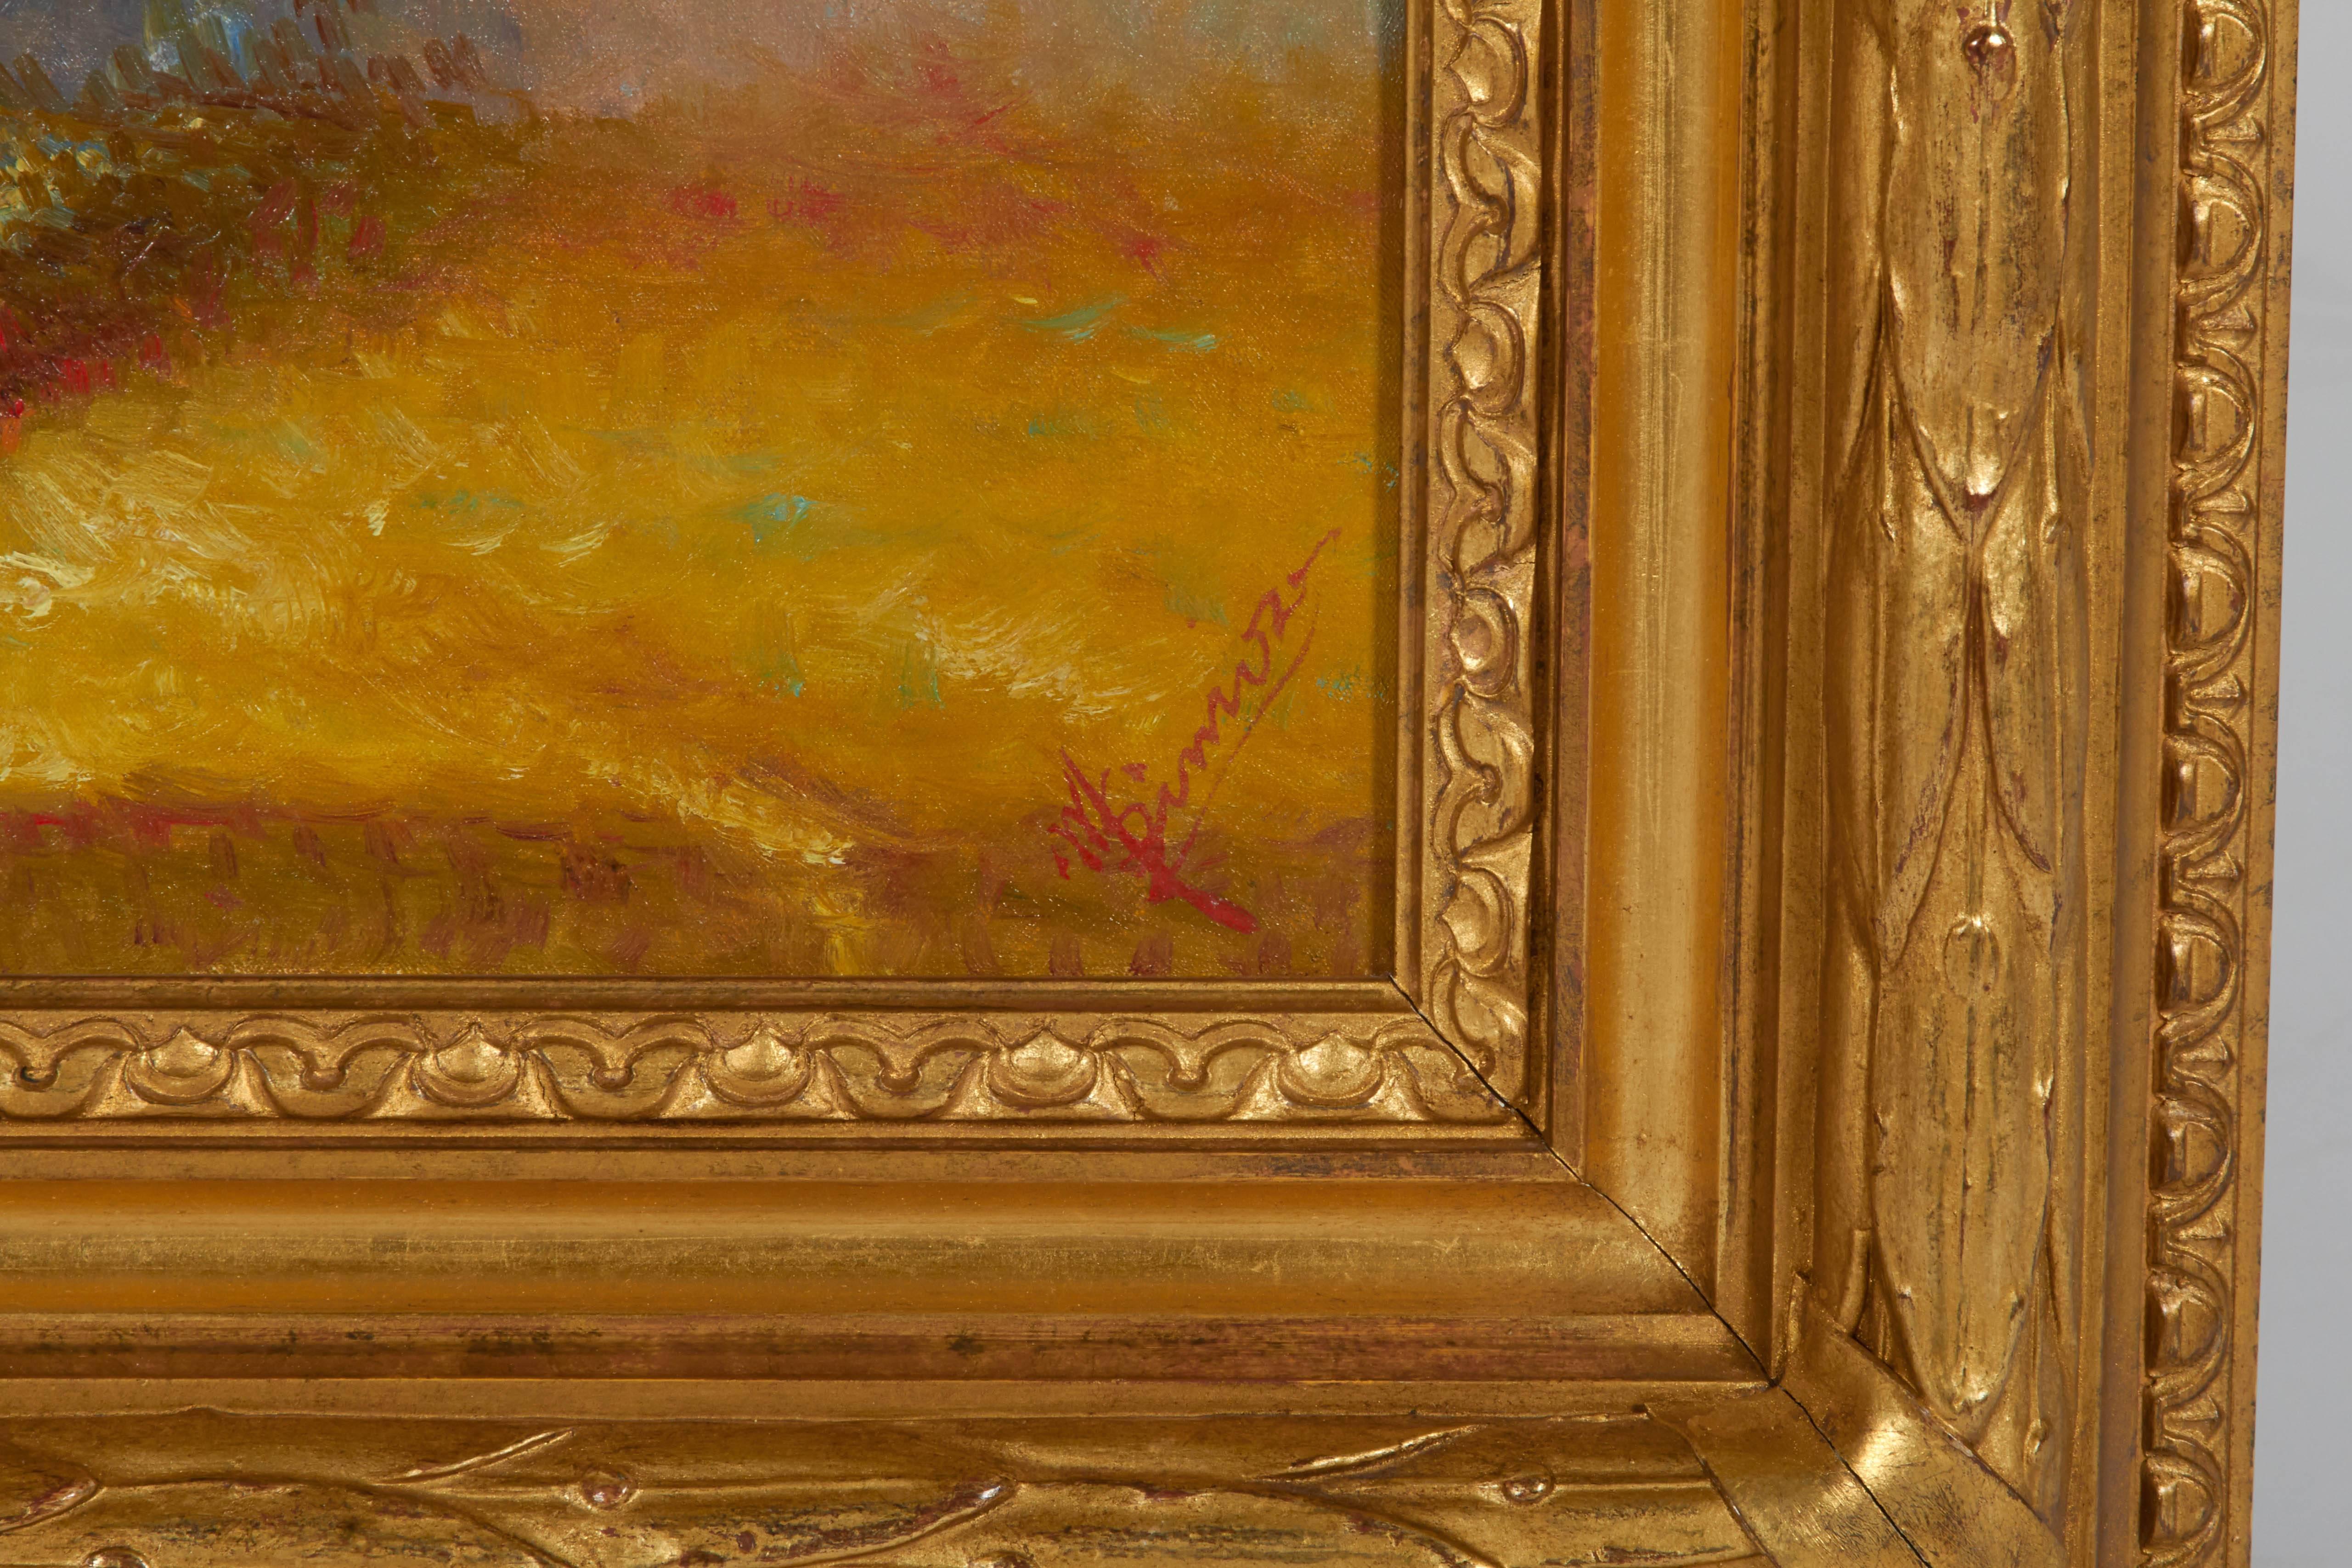 Oil on canvas floral study. Framed in gold color frame. Signature found lower right but illegible.

*Not available for sale or to ship in the state of California.